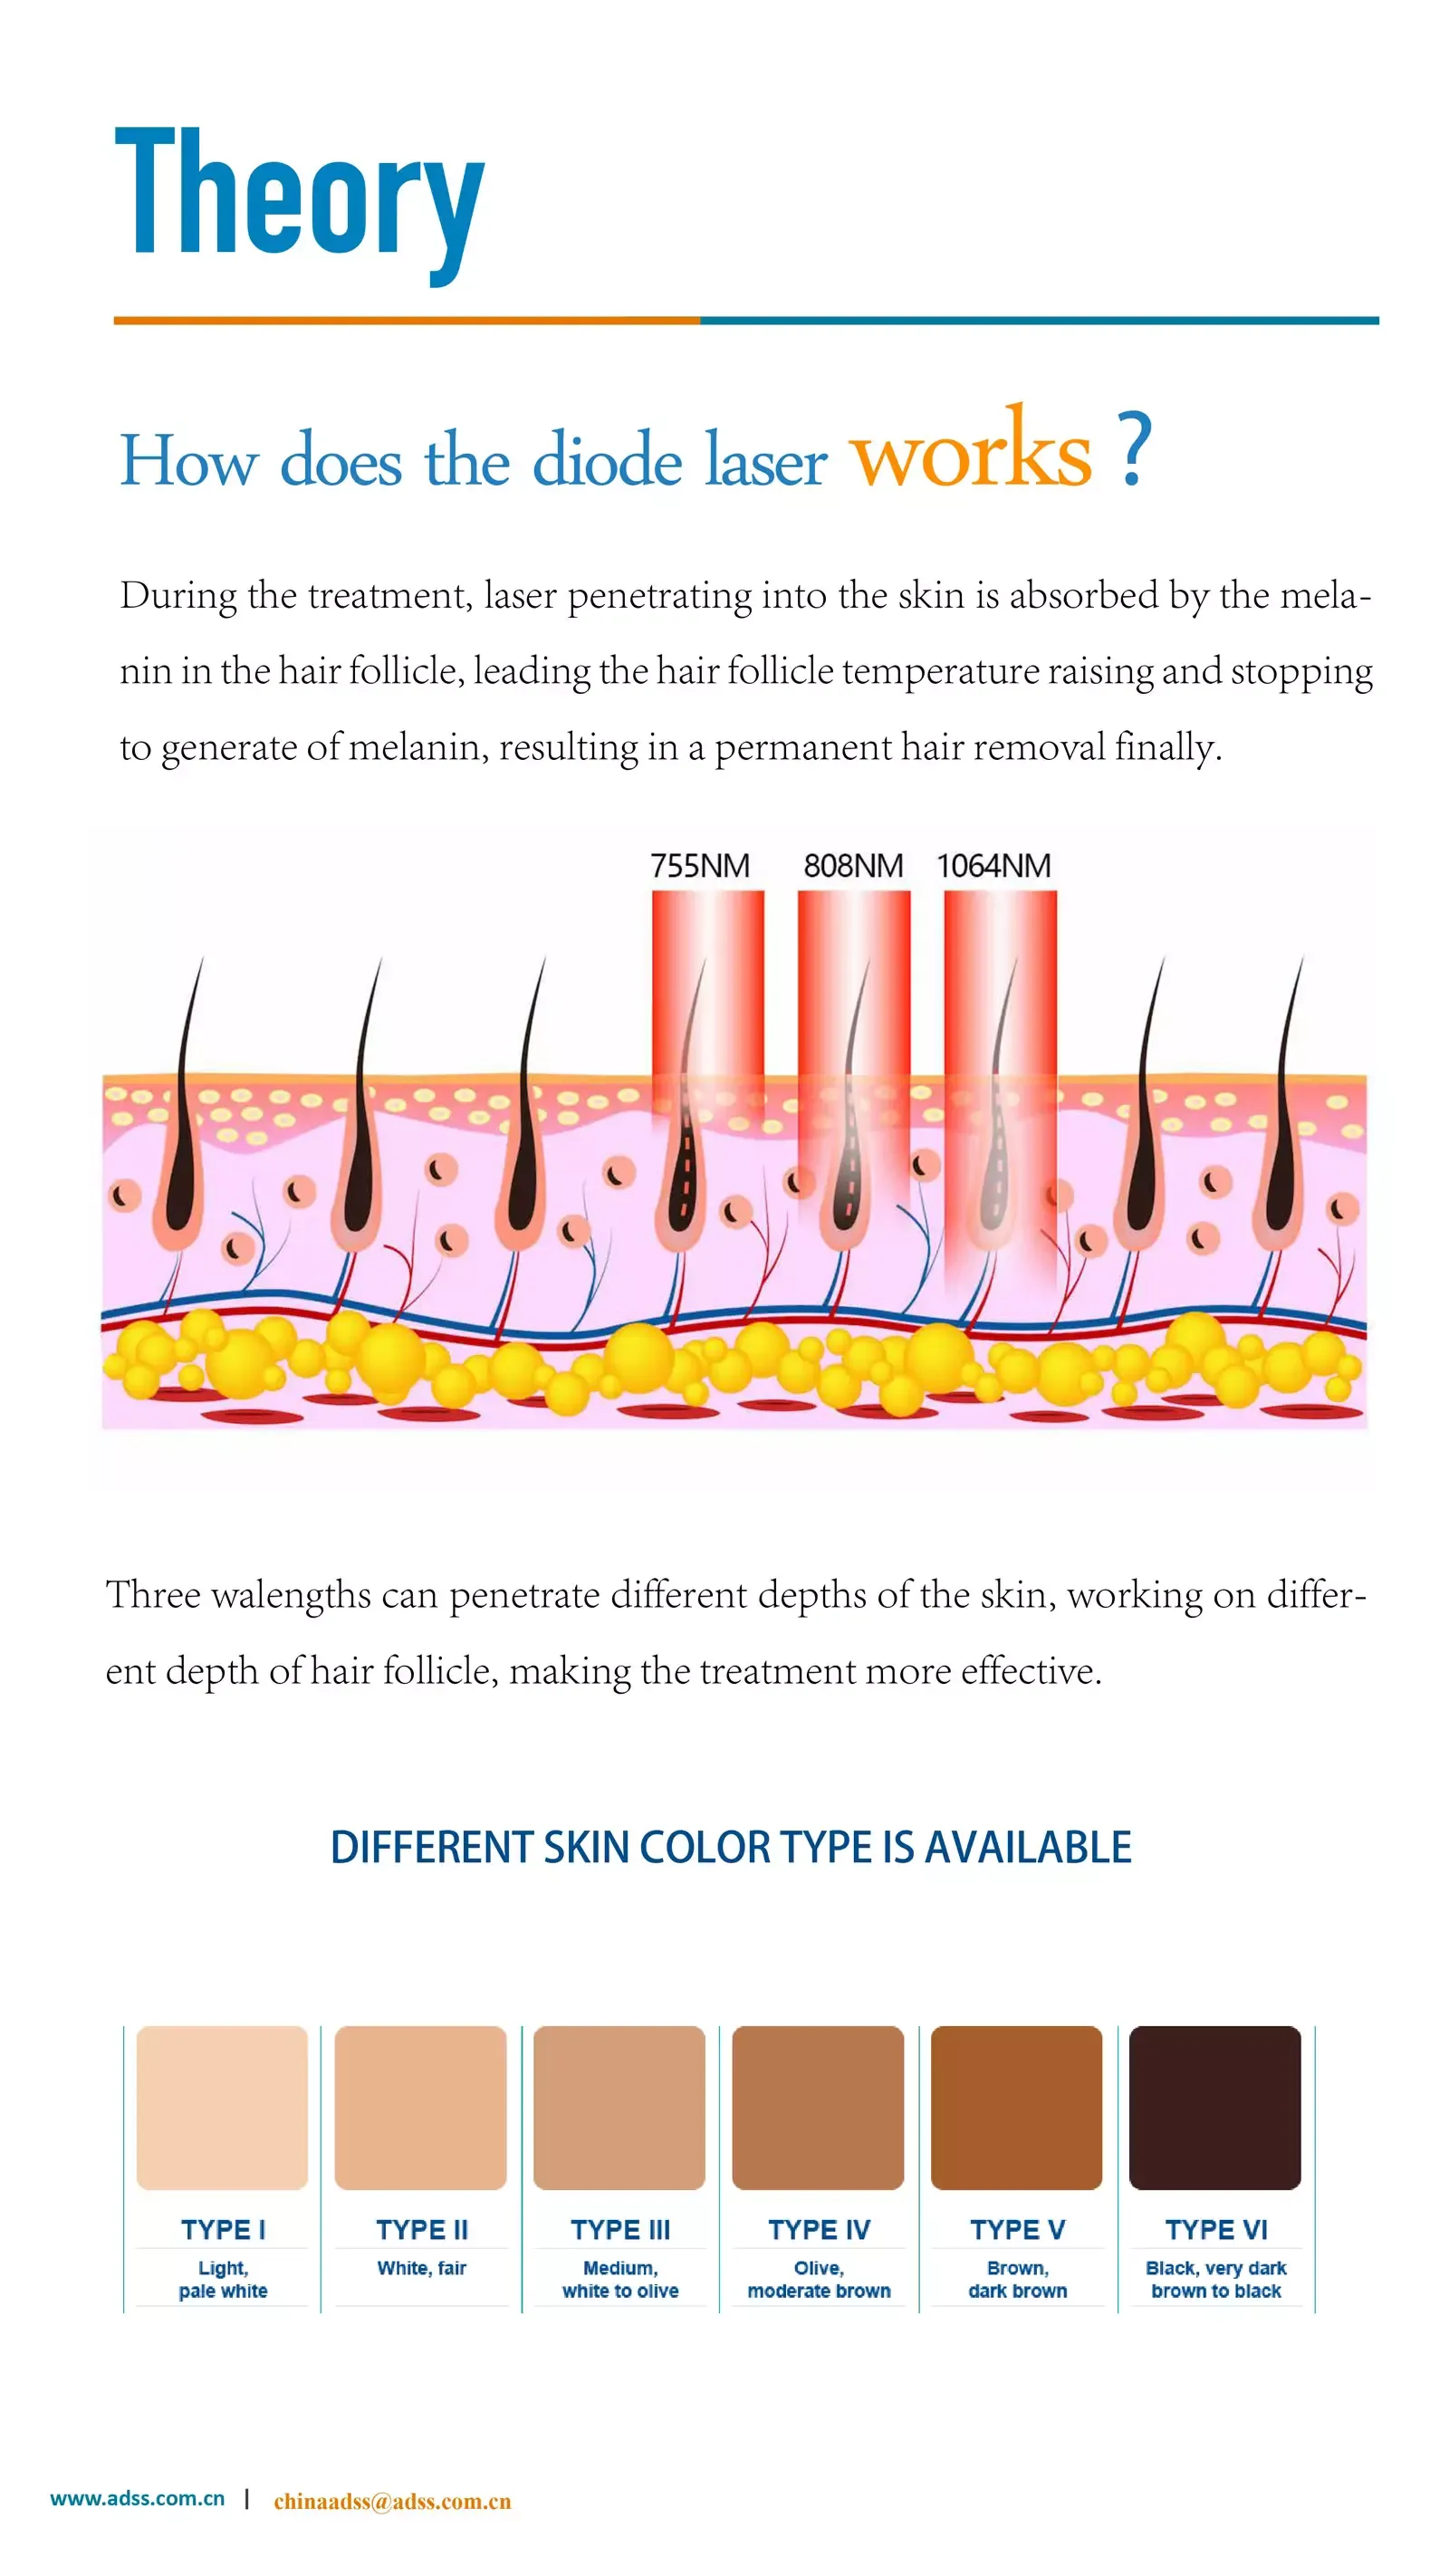 Diode Laser Hair Removal Device Brochure - ADSS Laser